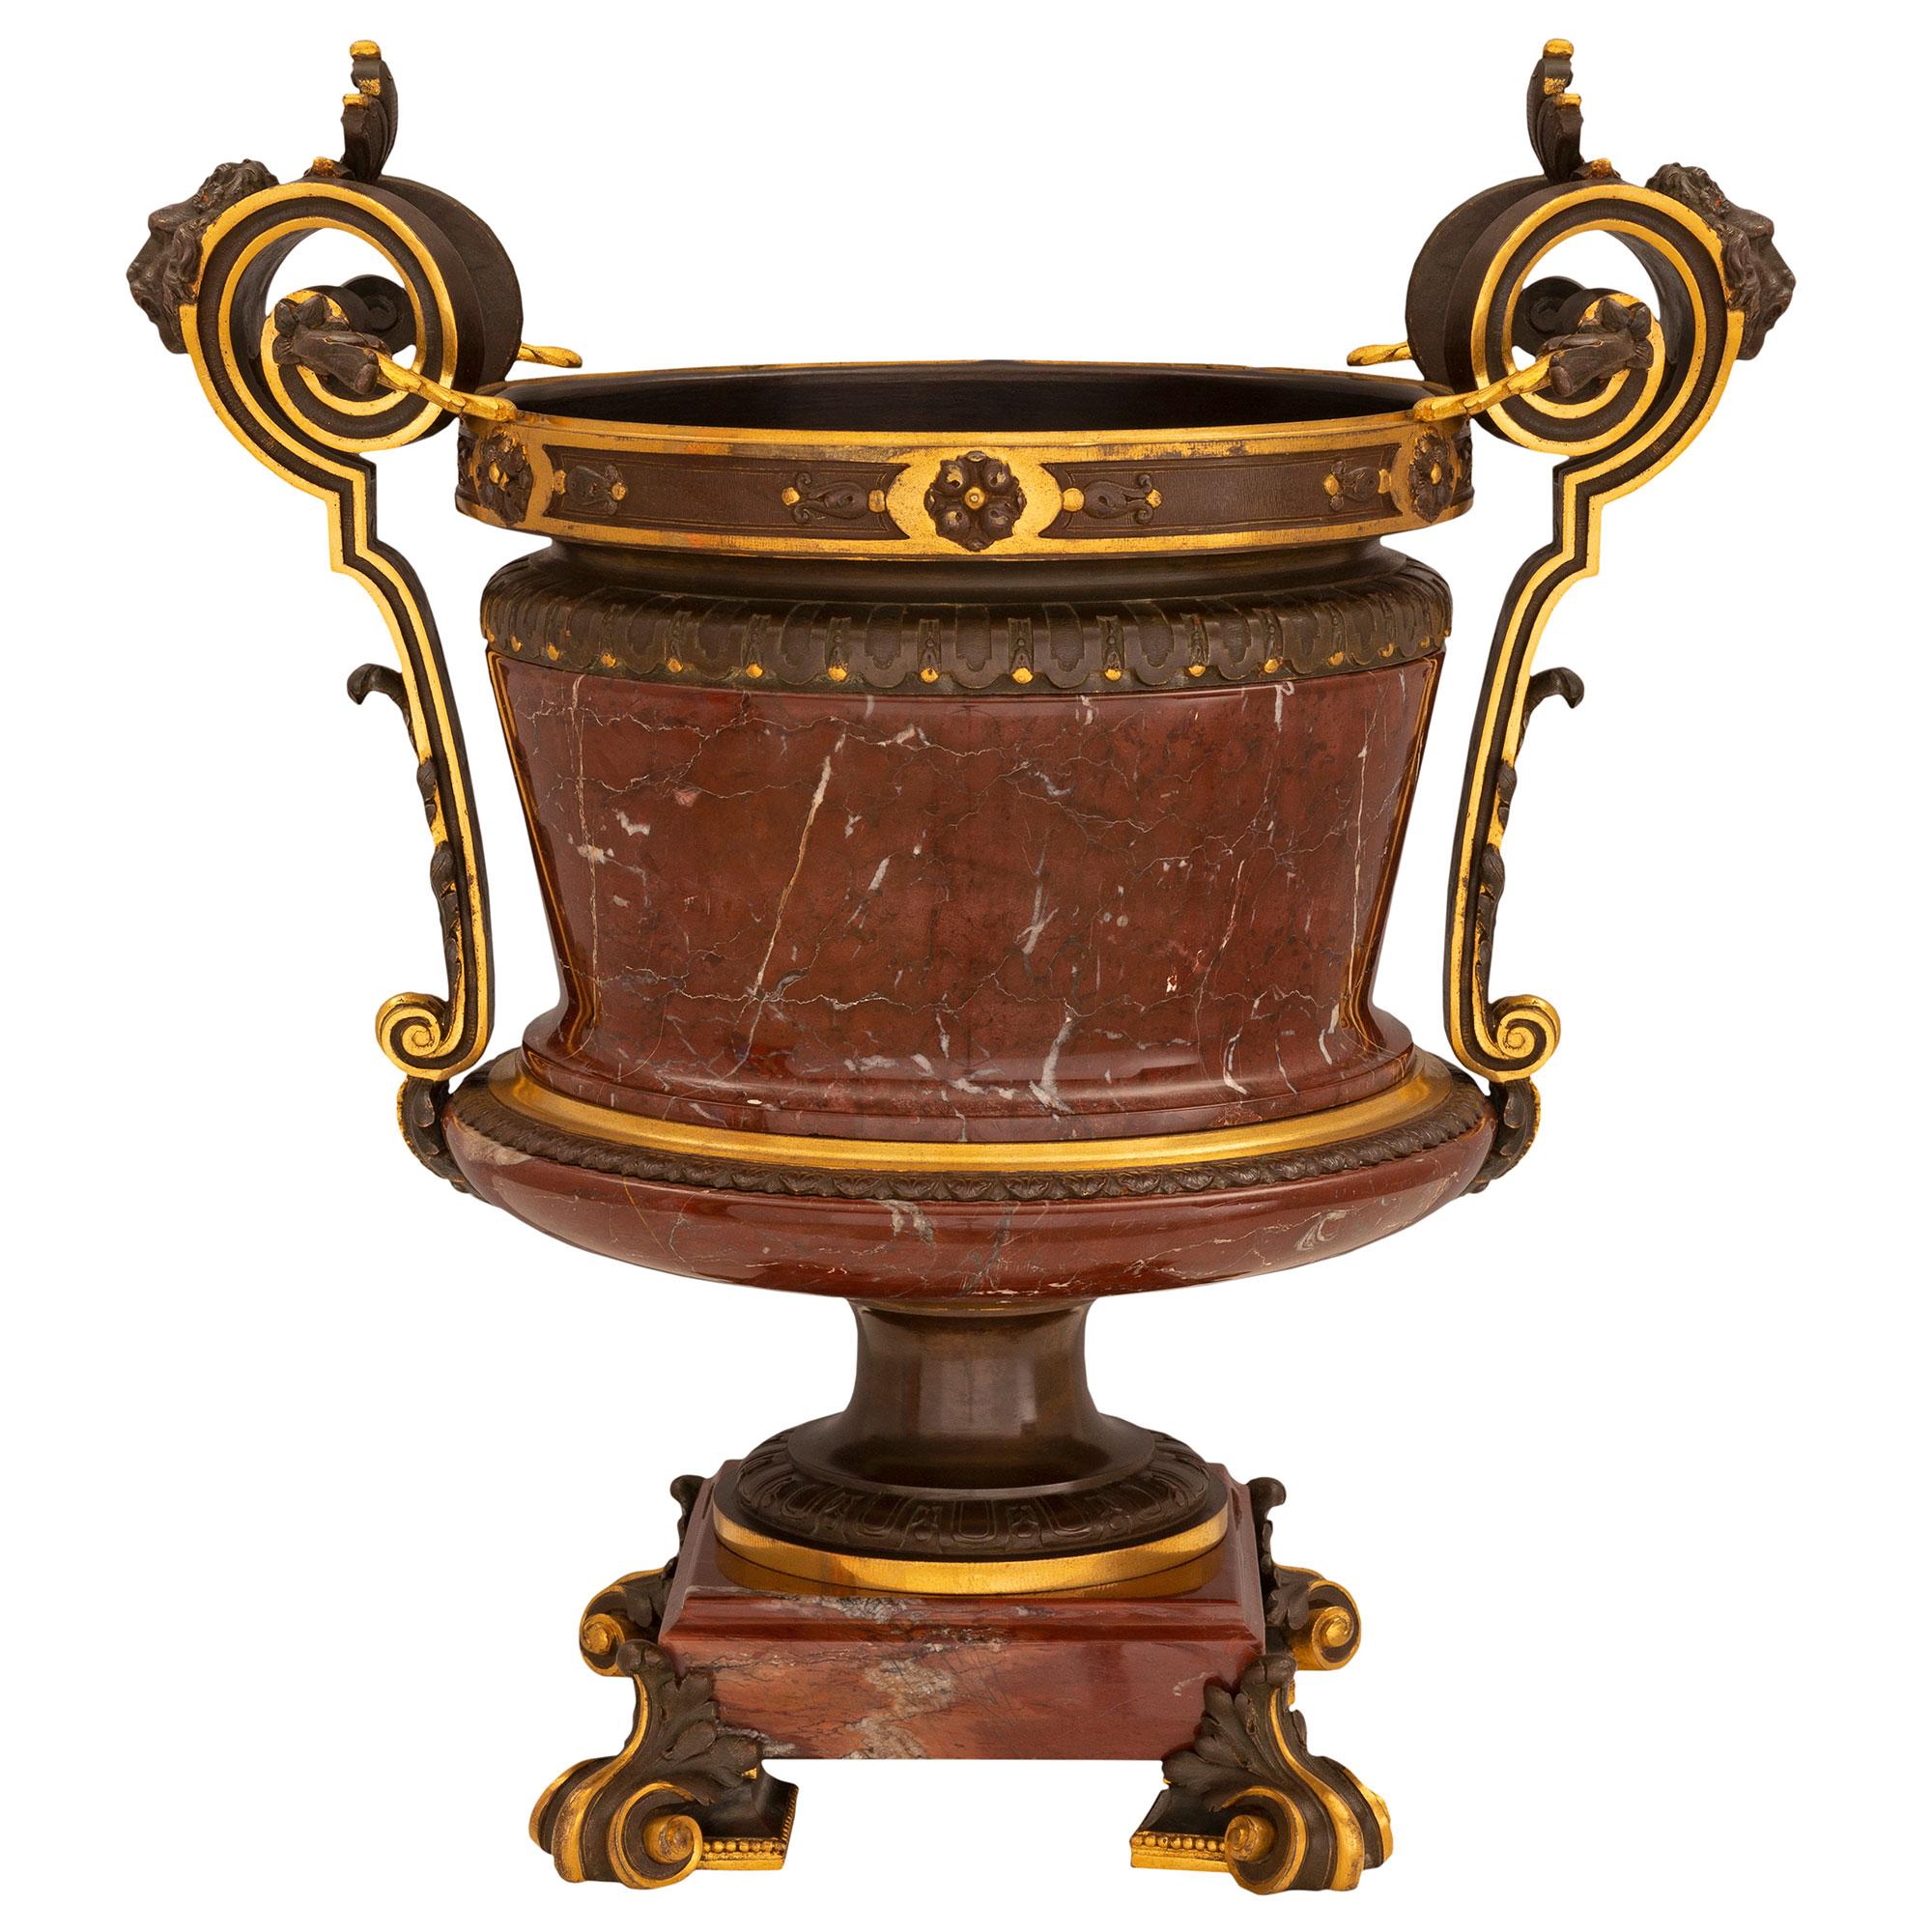 Neoclassical French 19th Century Neo-Classical St. Bronze, Ormolu and Marble Urn